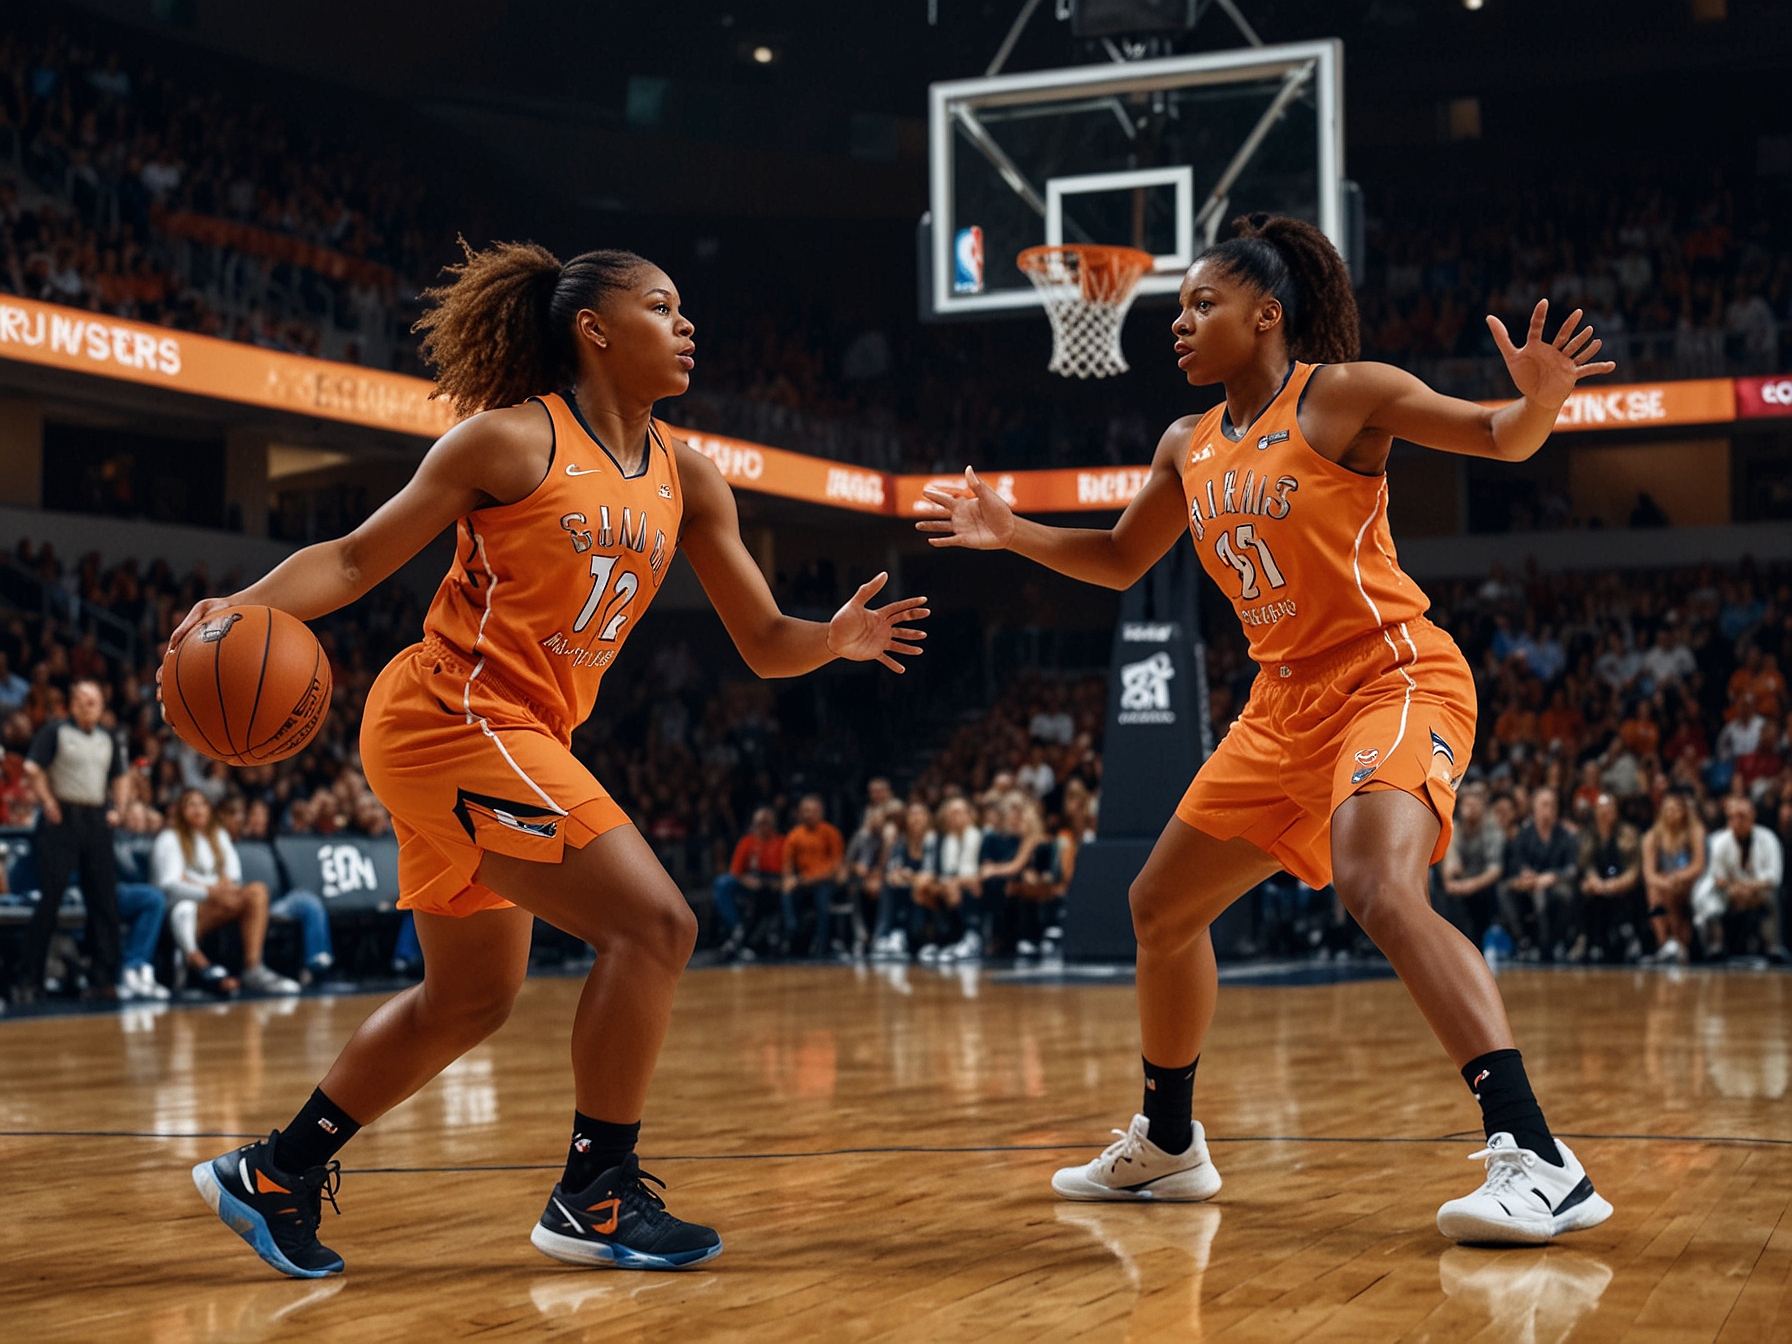 A thrilling basketball game between the Connecticut Sun and the Las Vegas Aces, highlighting intense on-court action and dynamic plays.